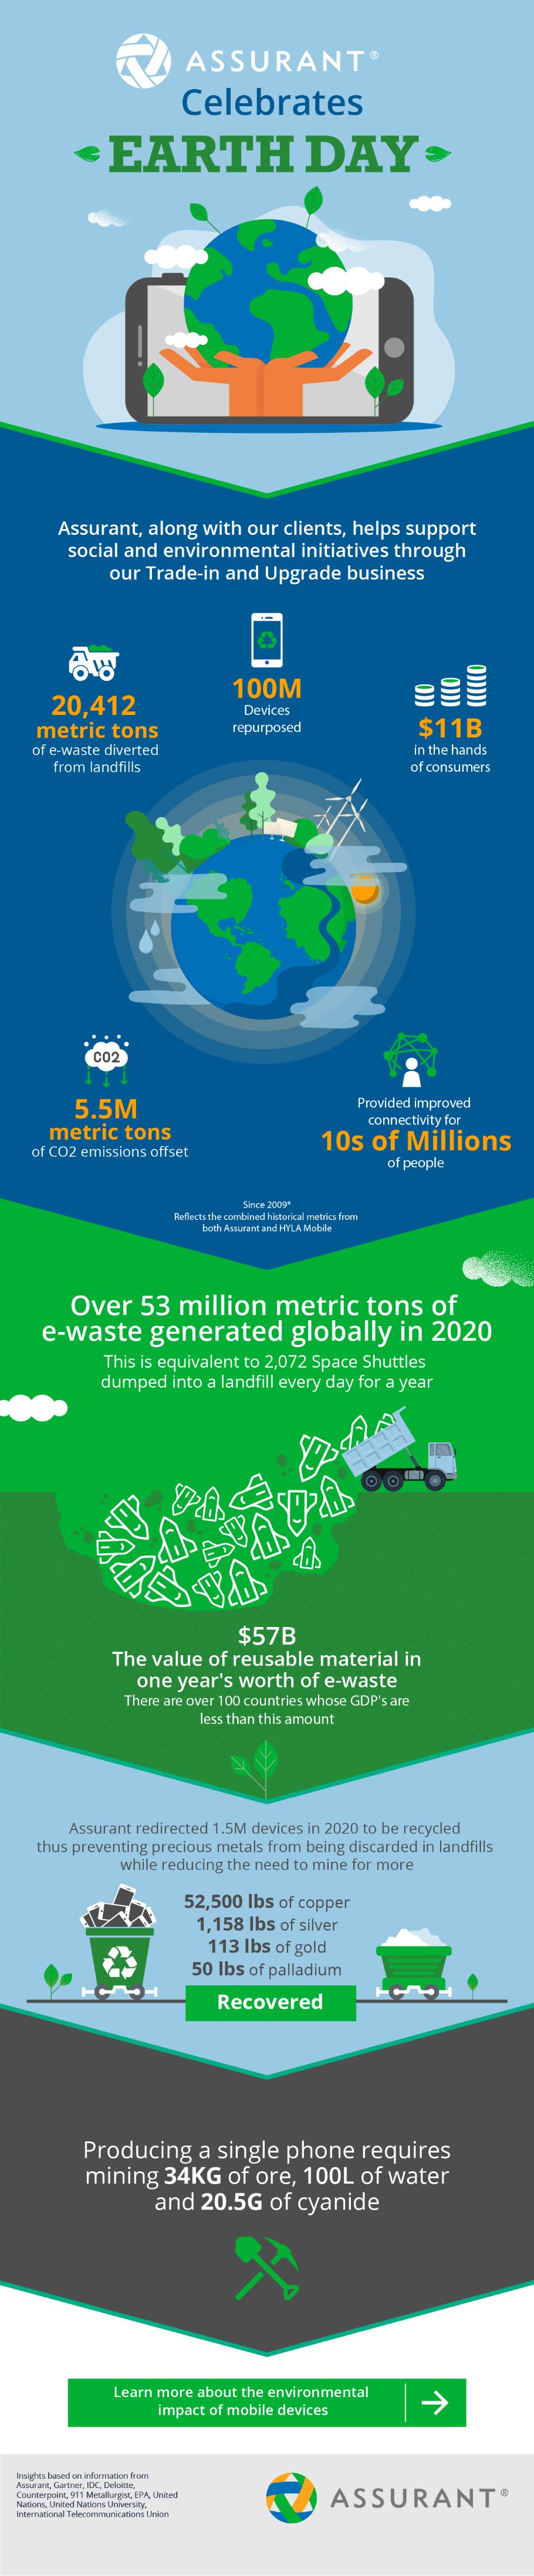 Assurant Earth Day Infographic